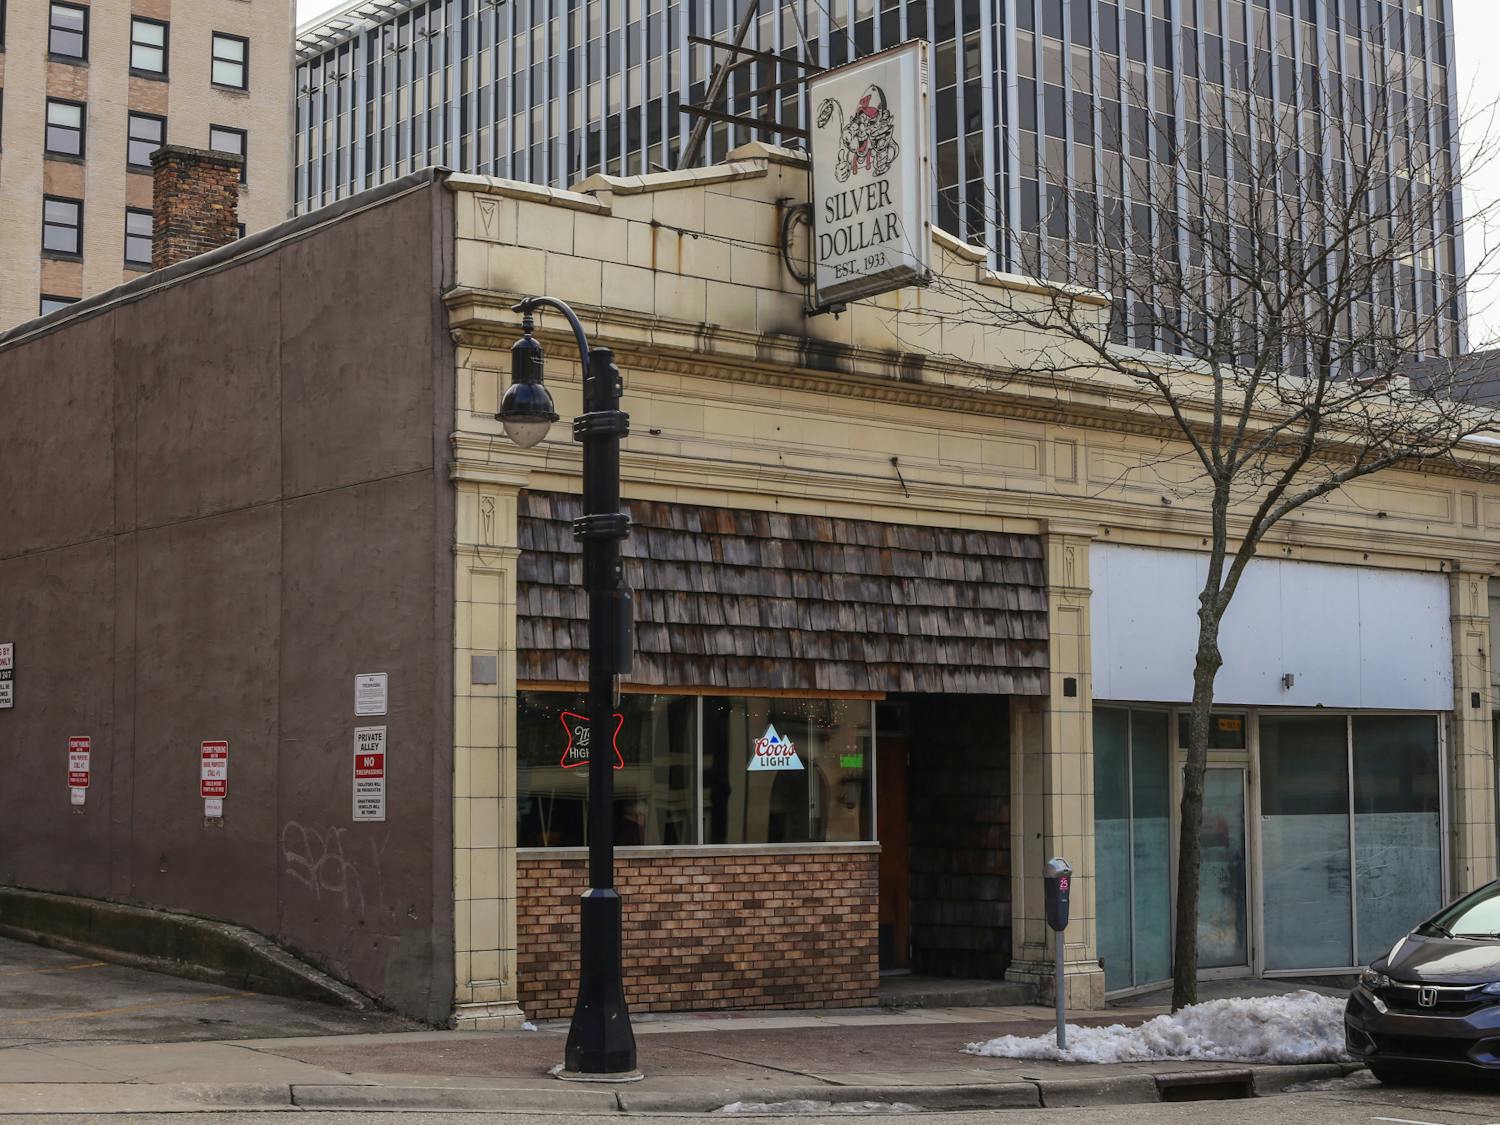 PHOTOS: The Silver Dollar photographed Jan. 28 is set to close Feb. 3.